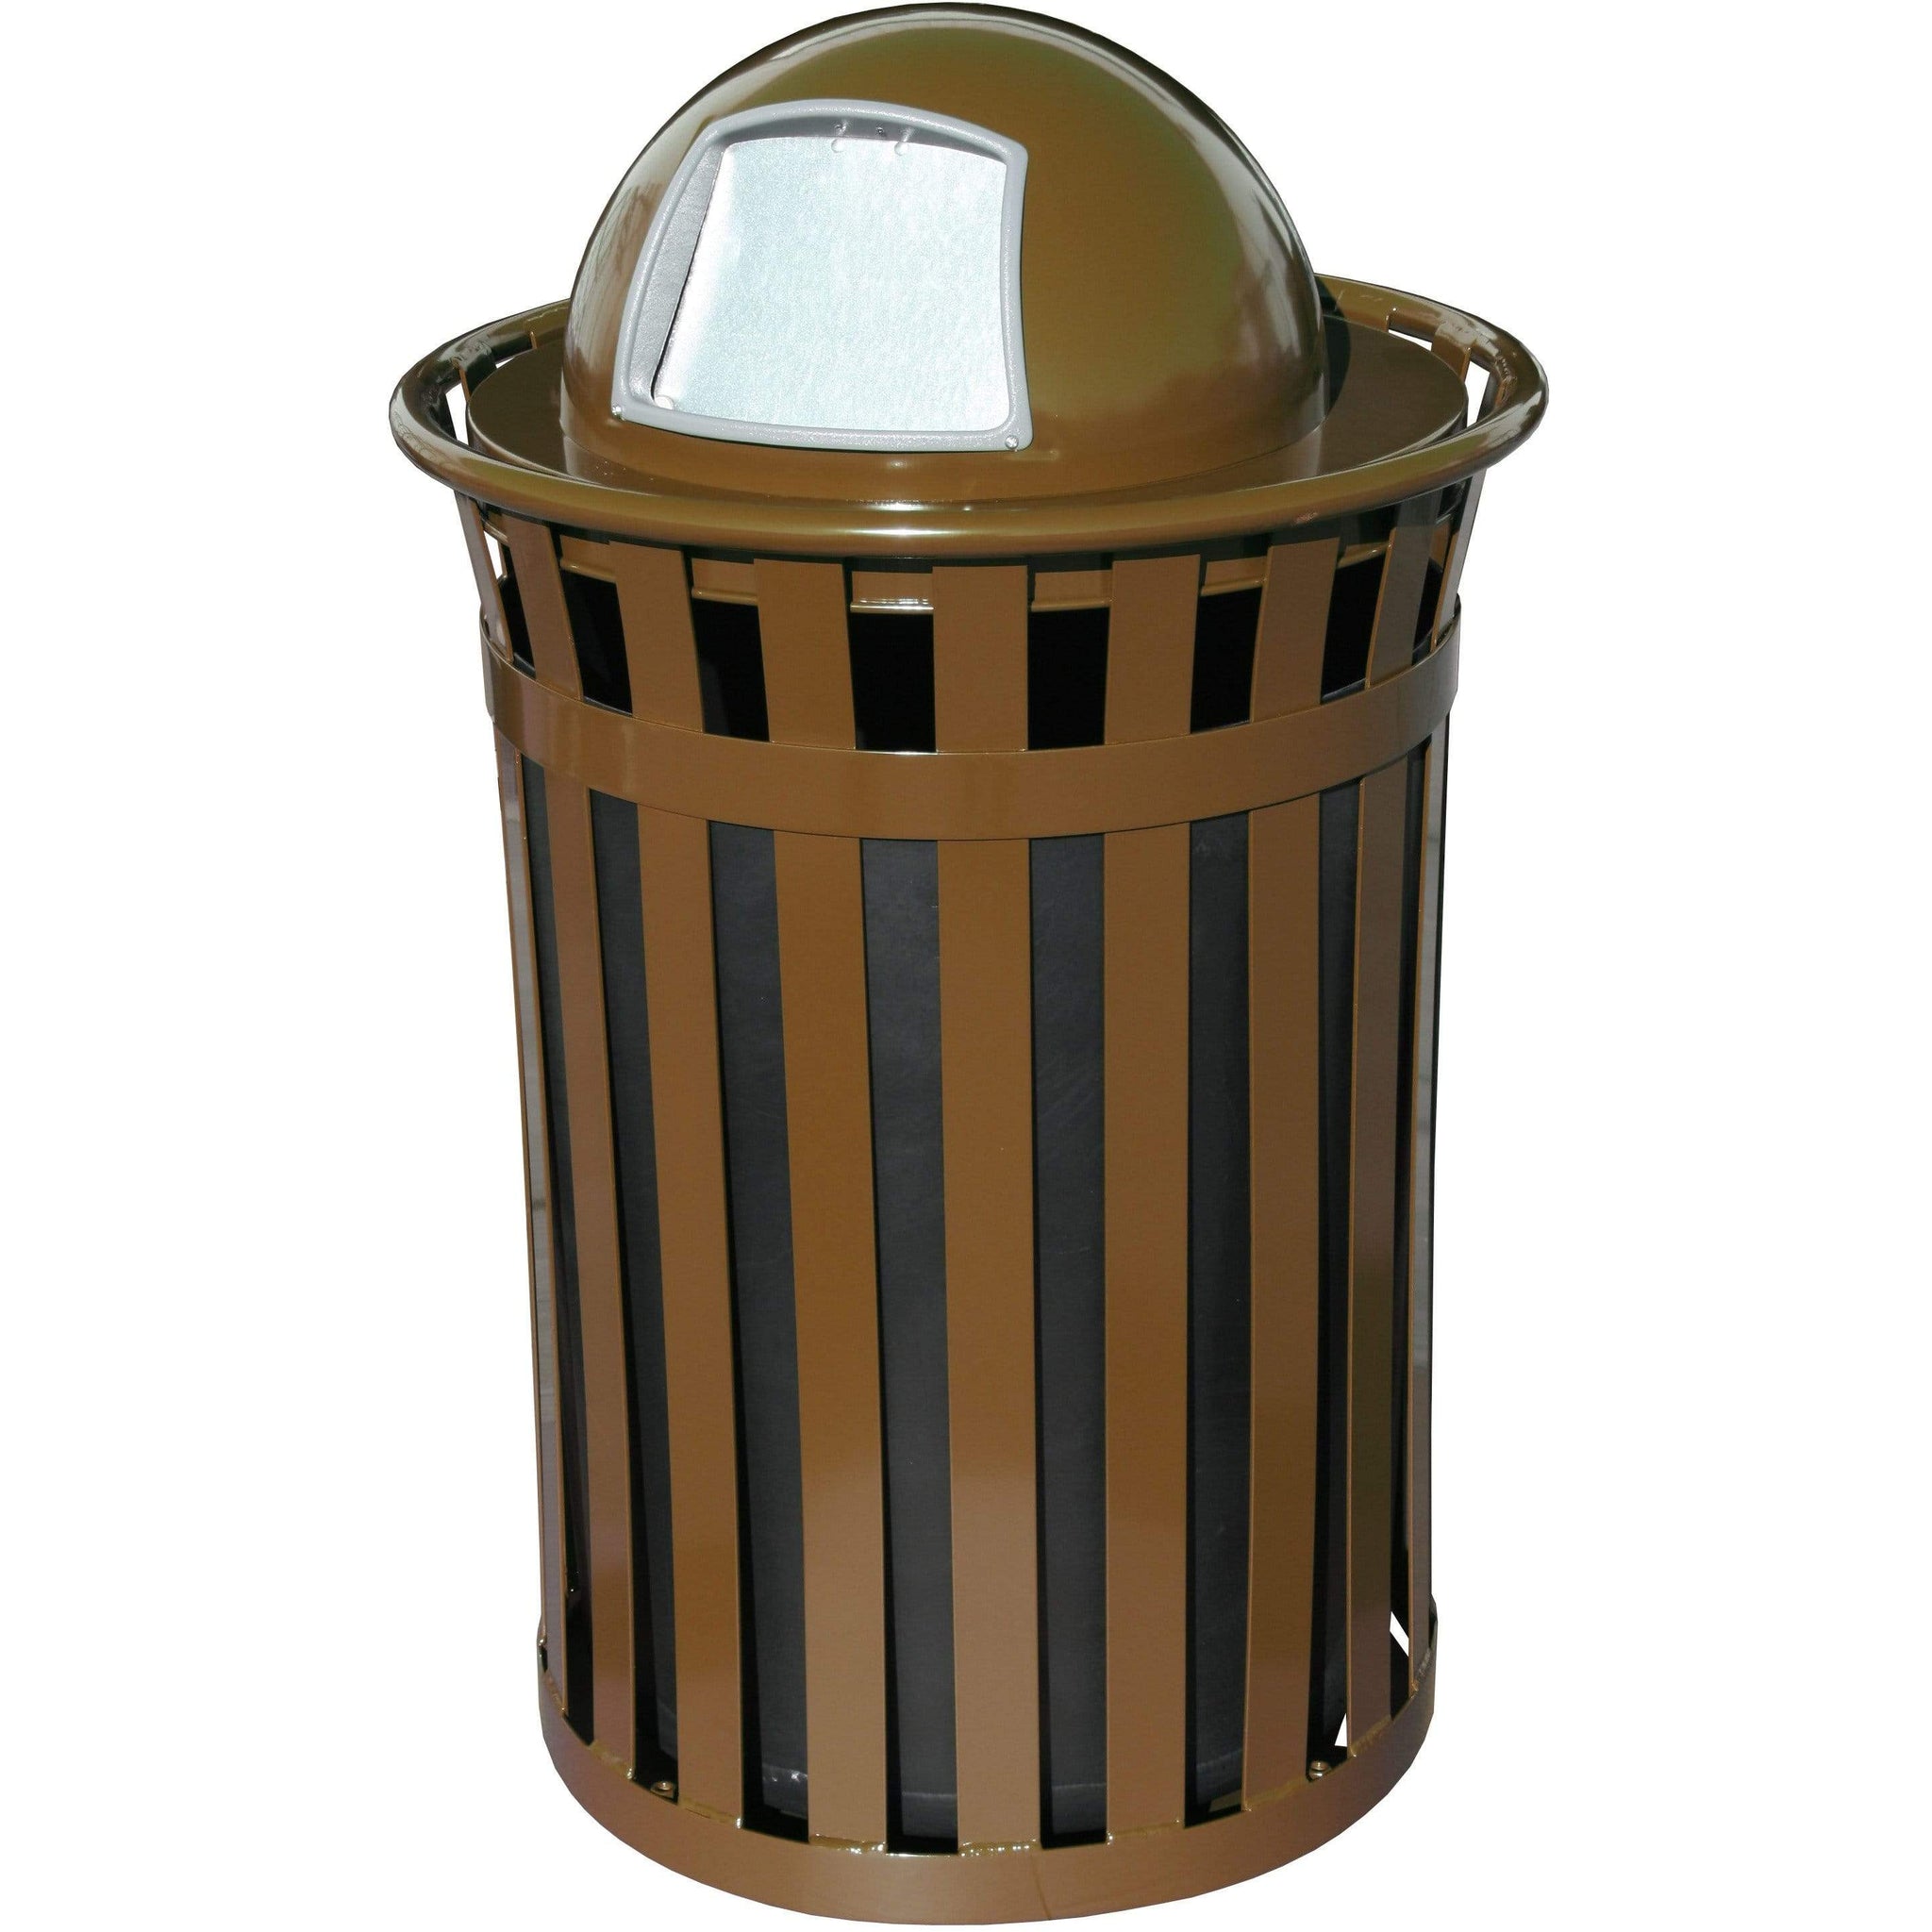 Witt Industries Oakley Collection Dome Top 50 Gallon Steel Trash Recep